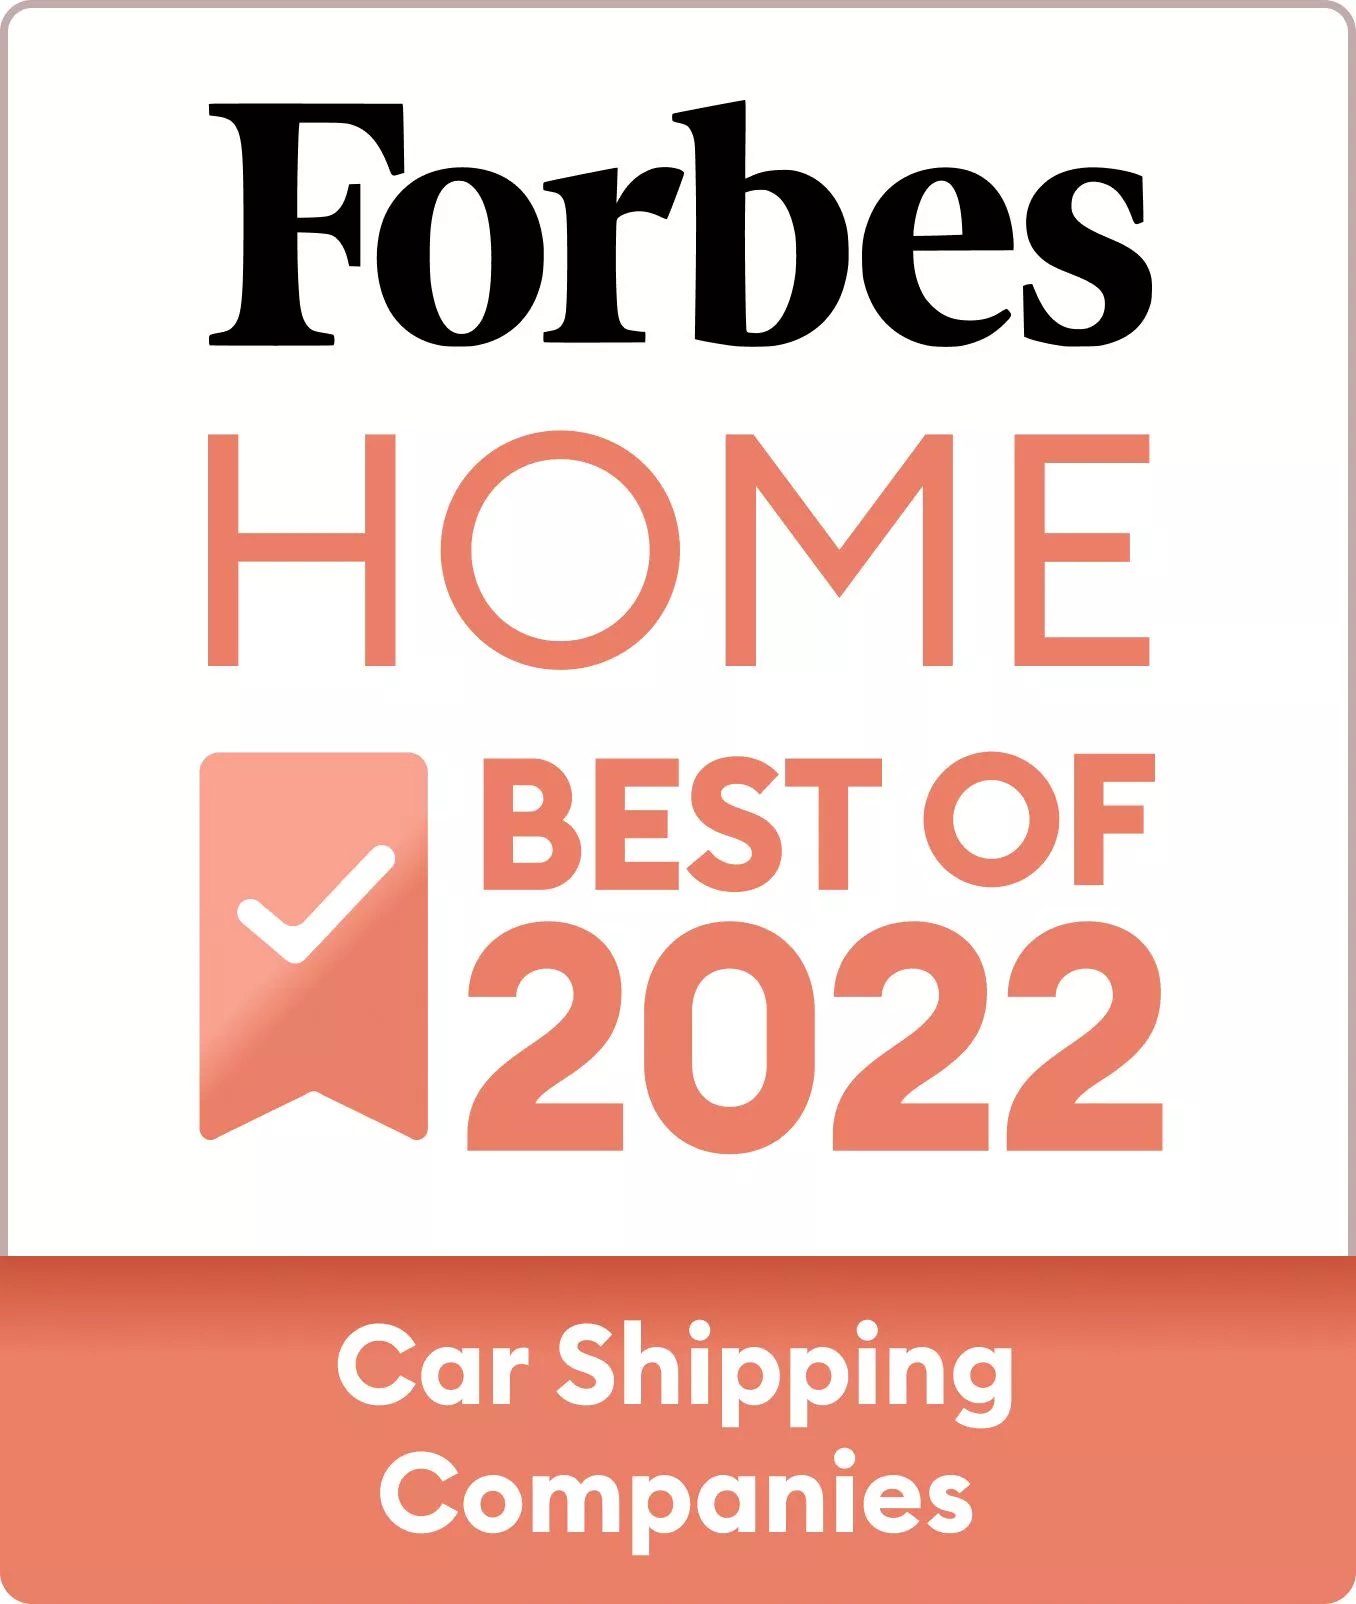 Forbes Home - Best of 2022